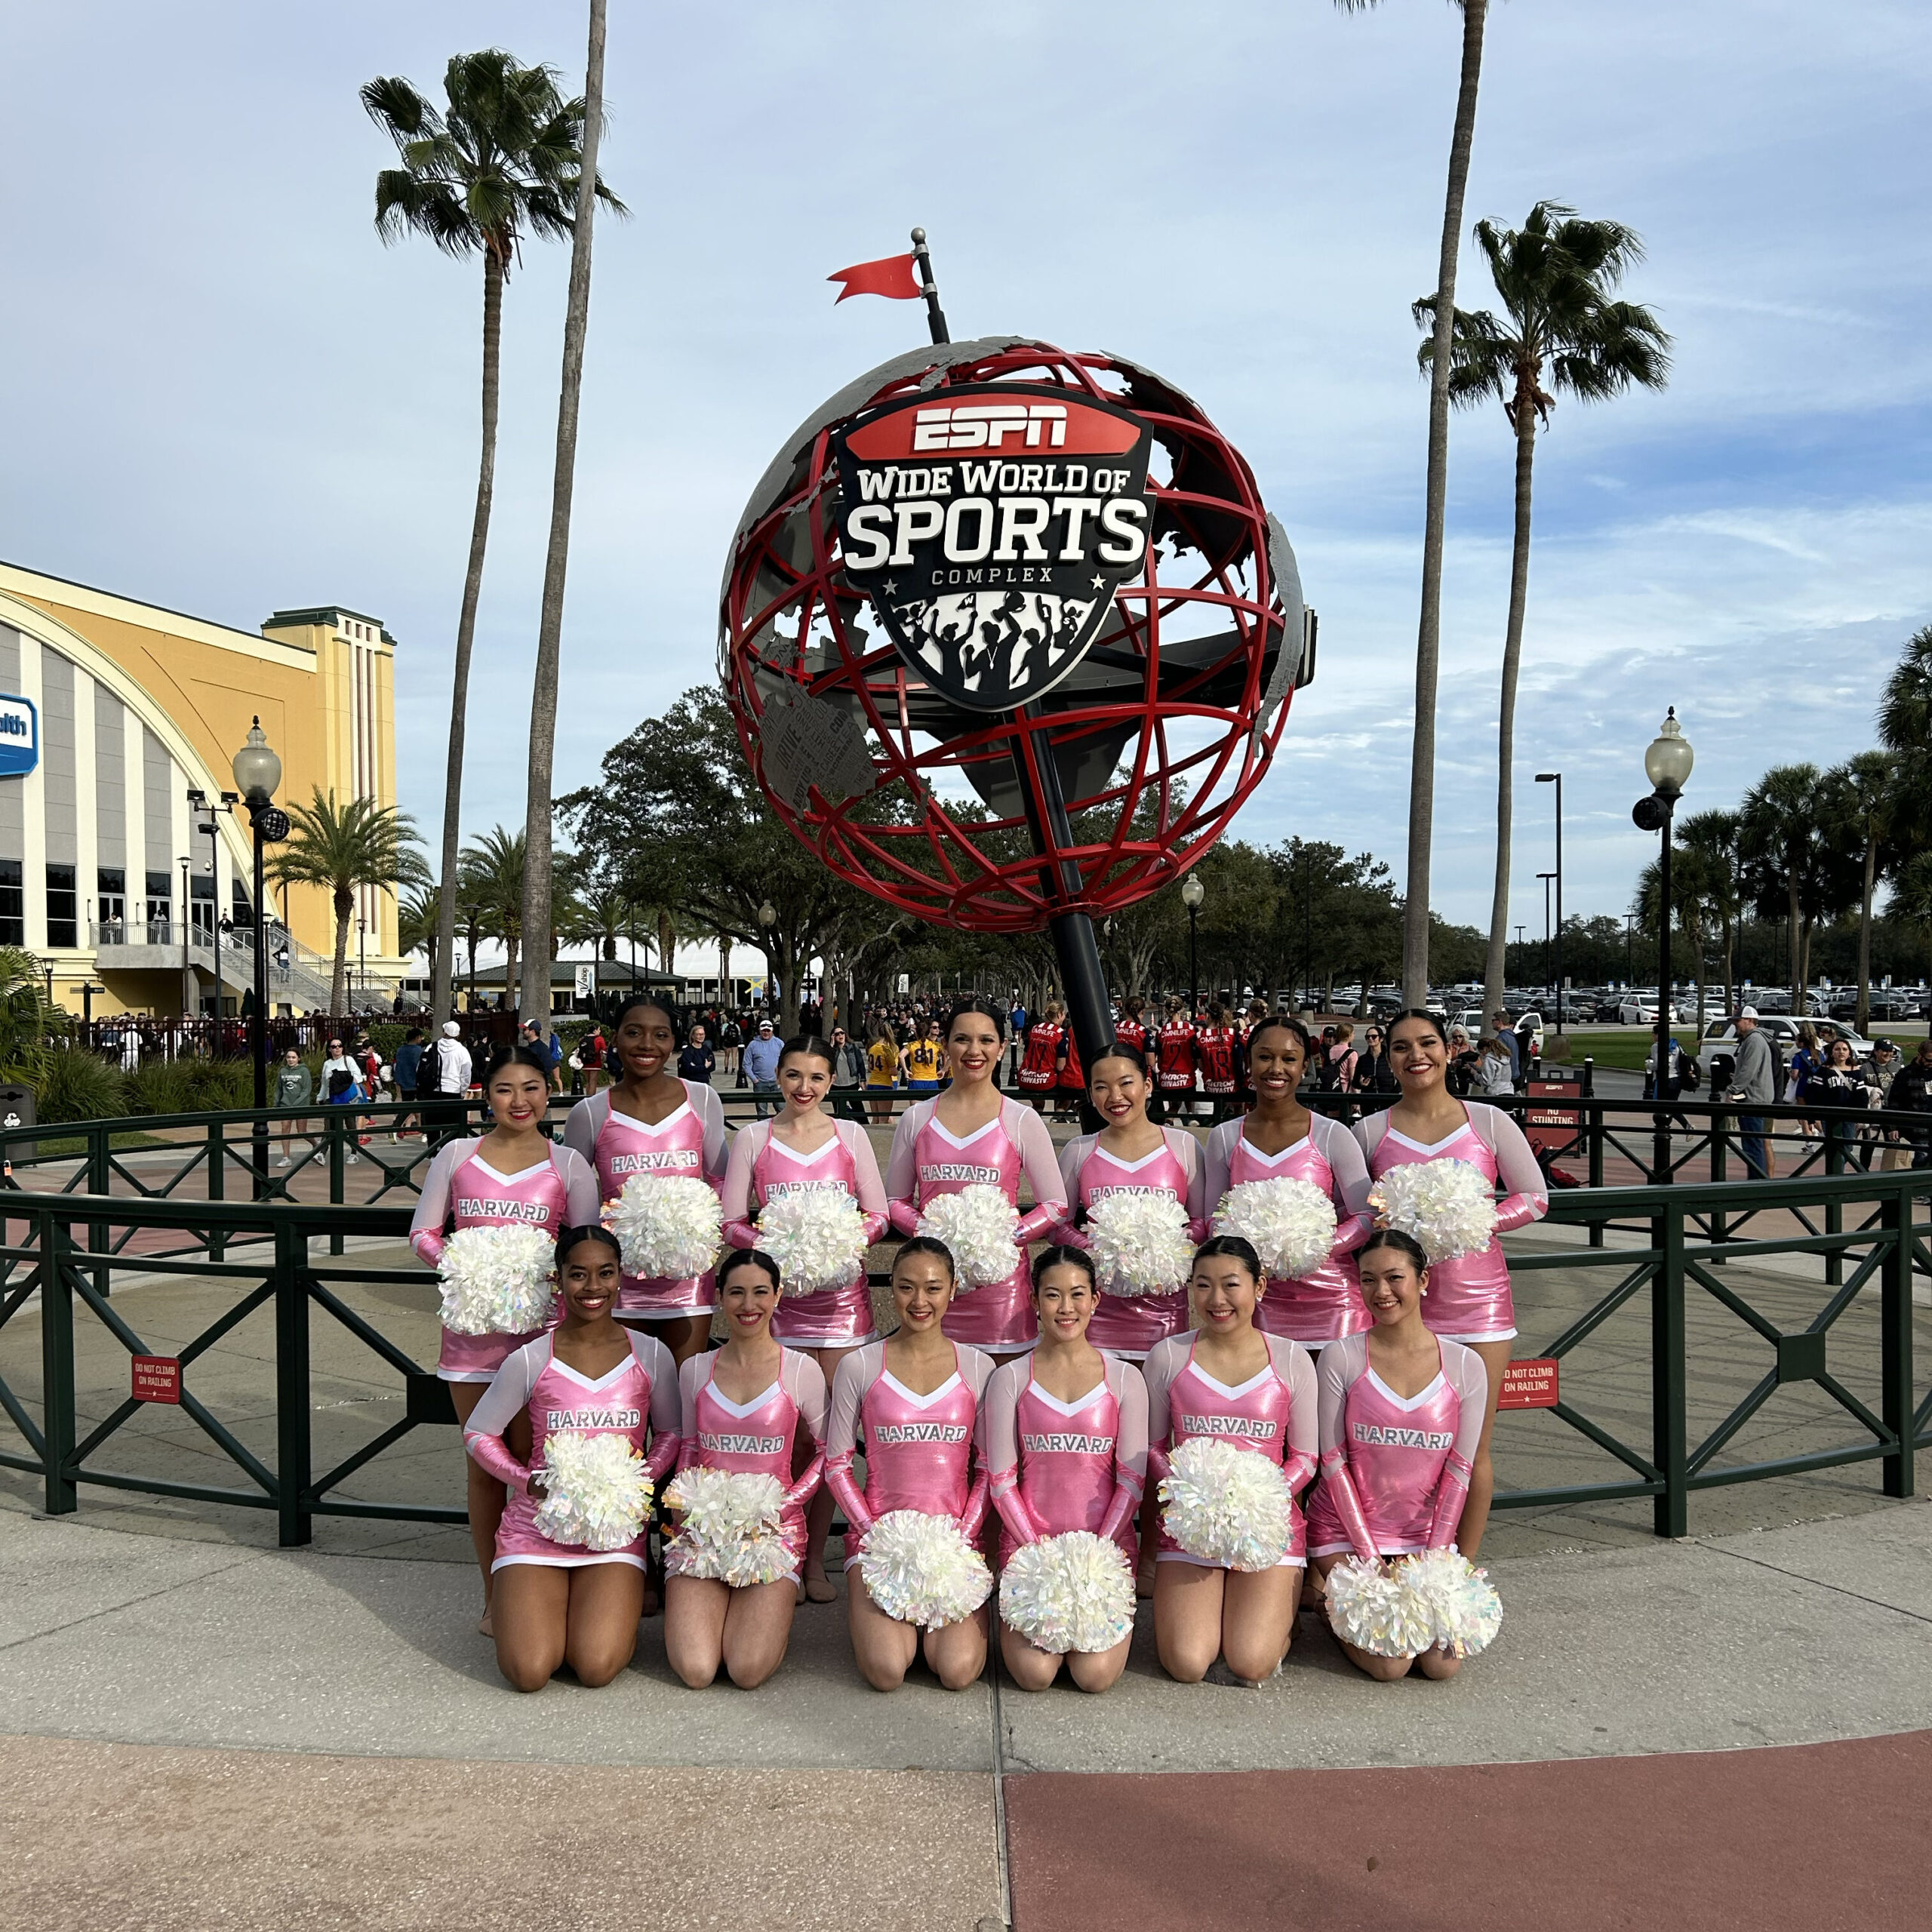 a group of dancers wearing pink uniforms and holding white poms smiling in front the Wide World of Sports logo